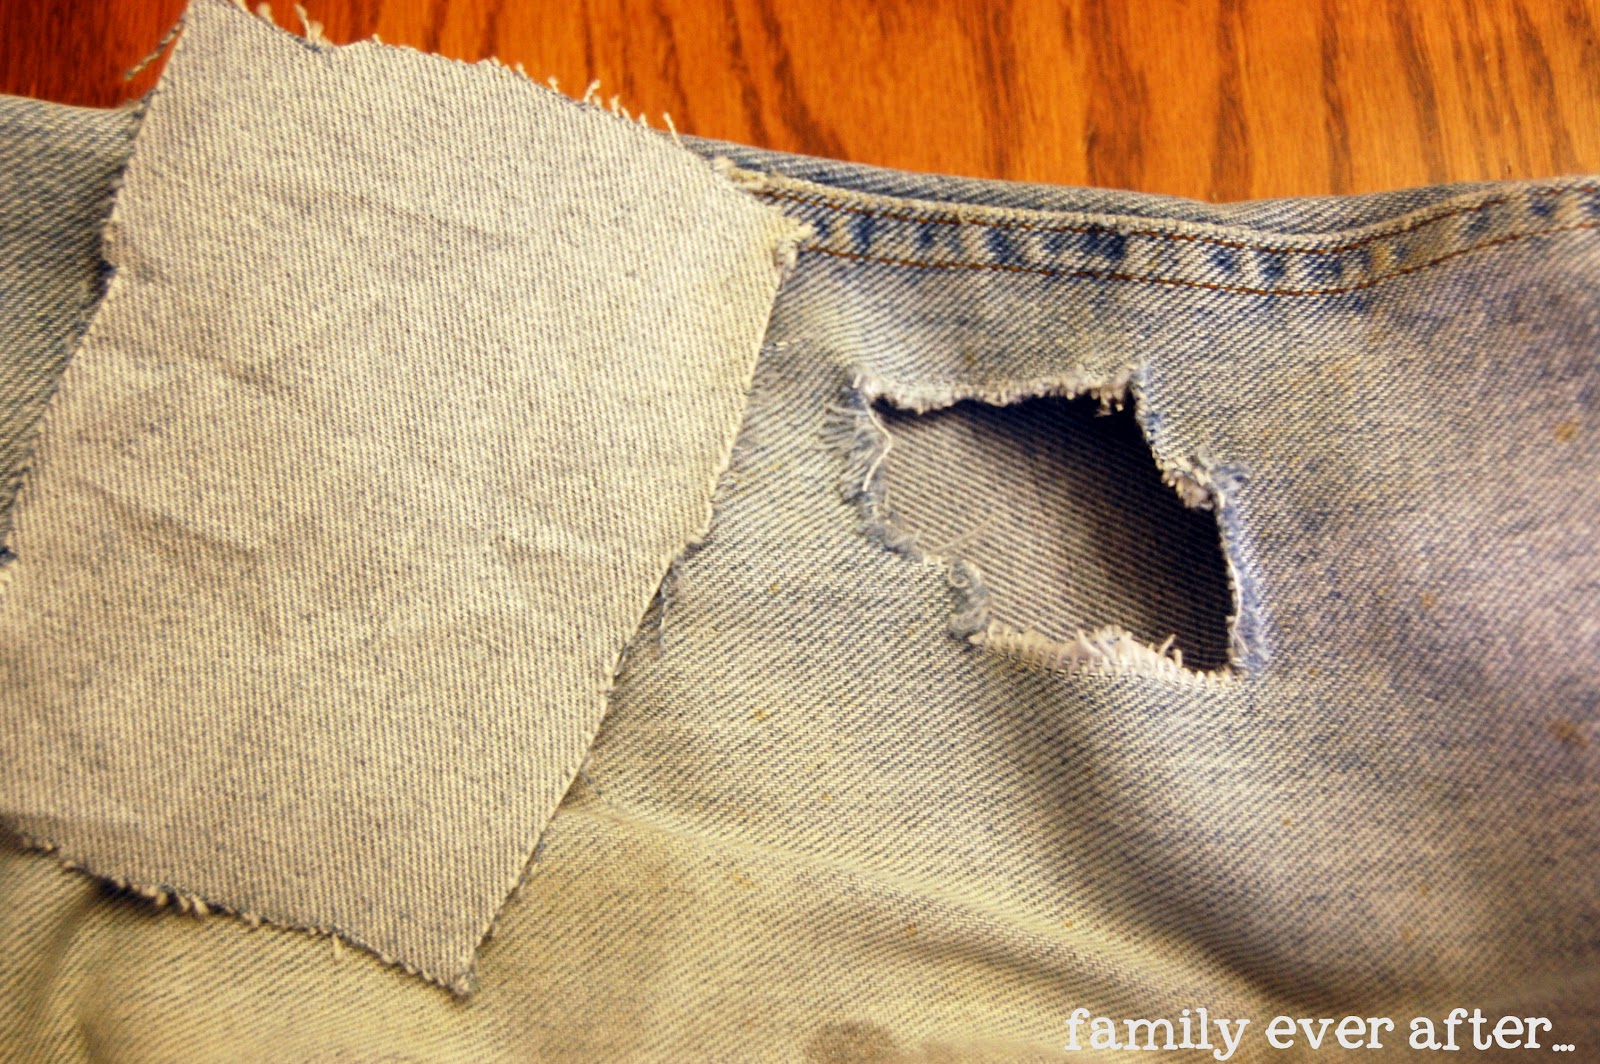 How To Patch Up A Hole In Your Pants